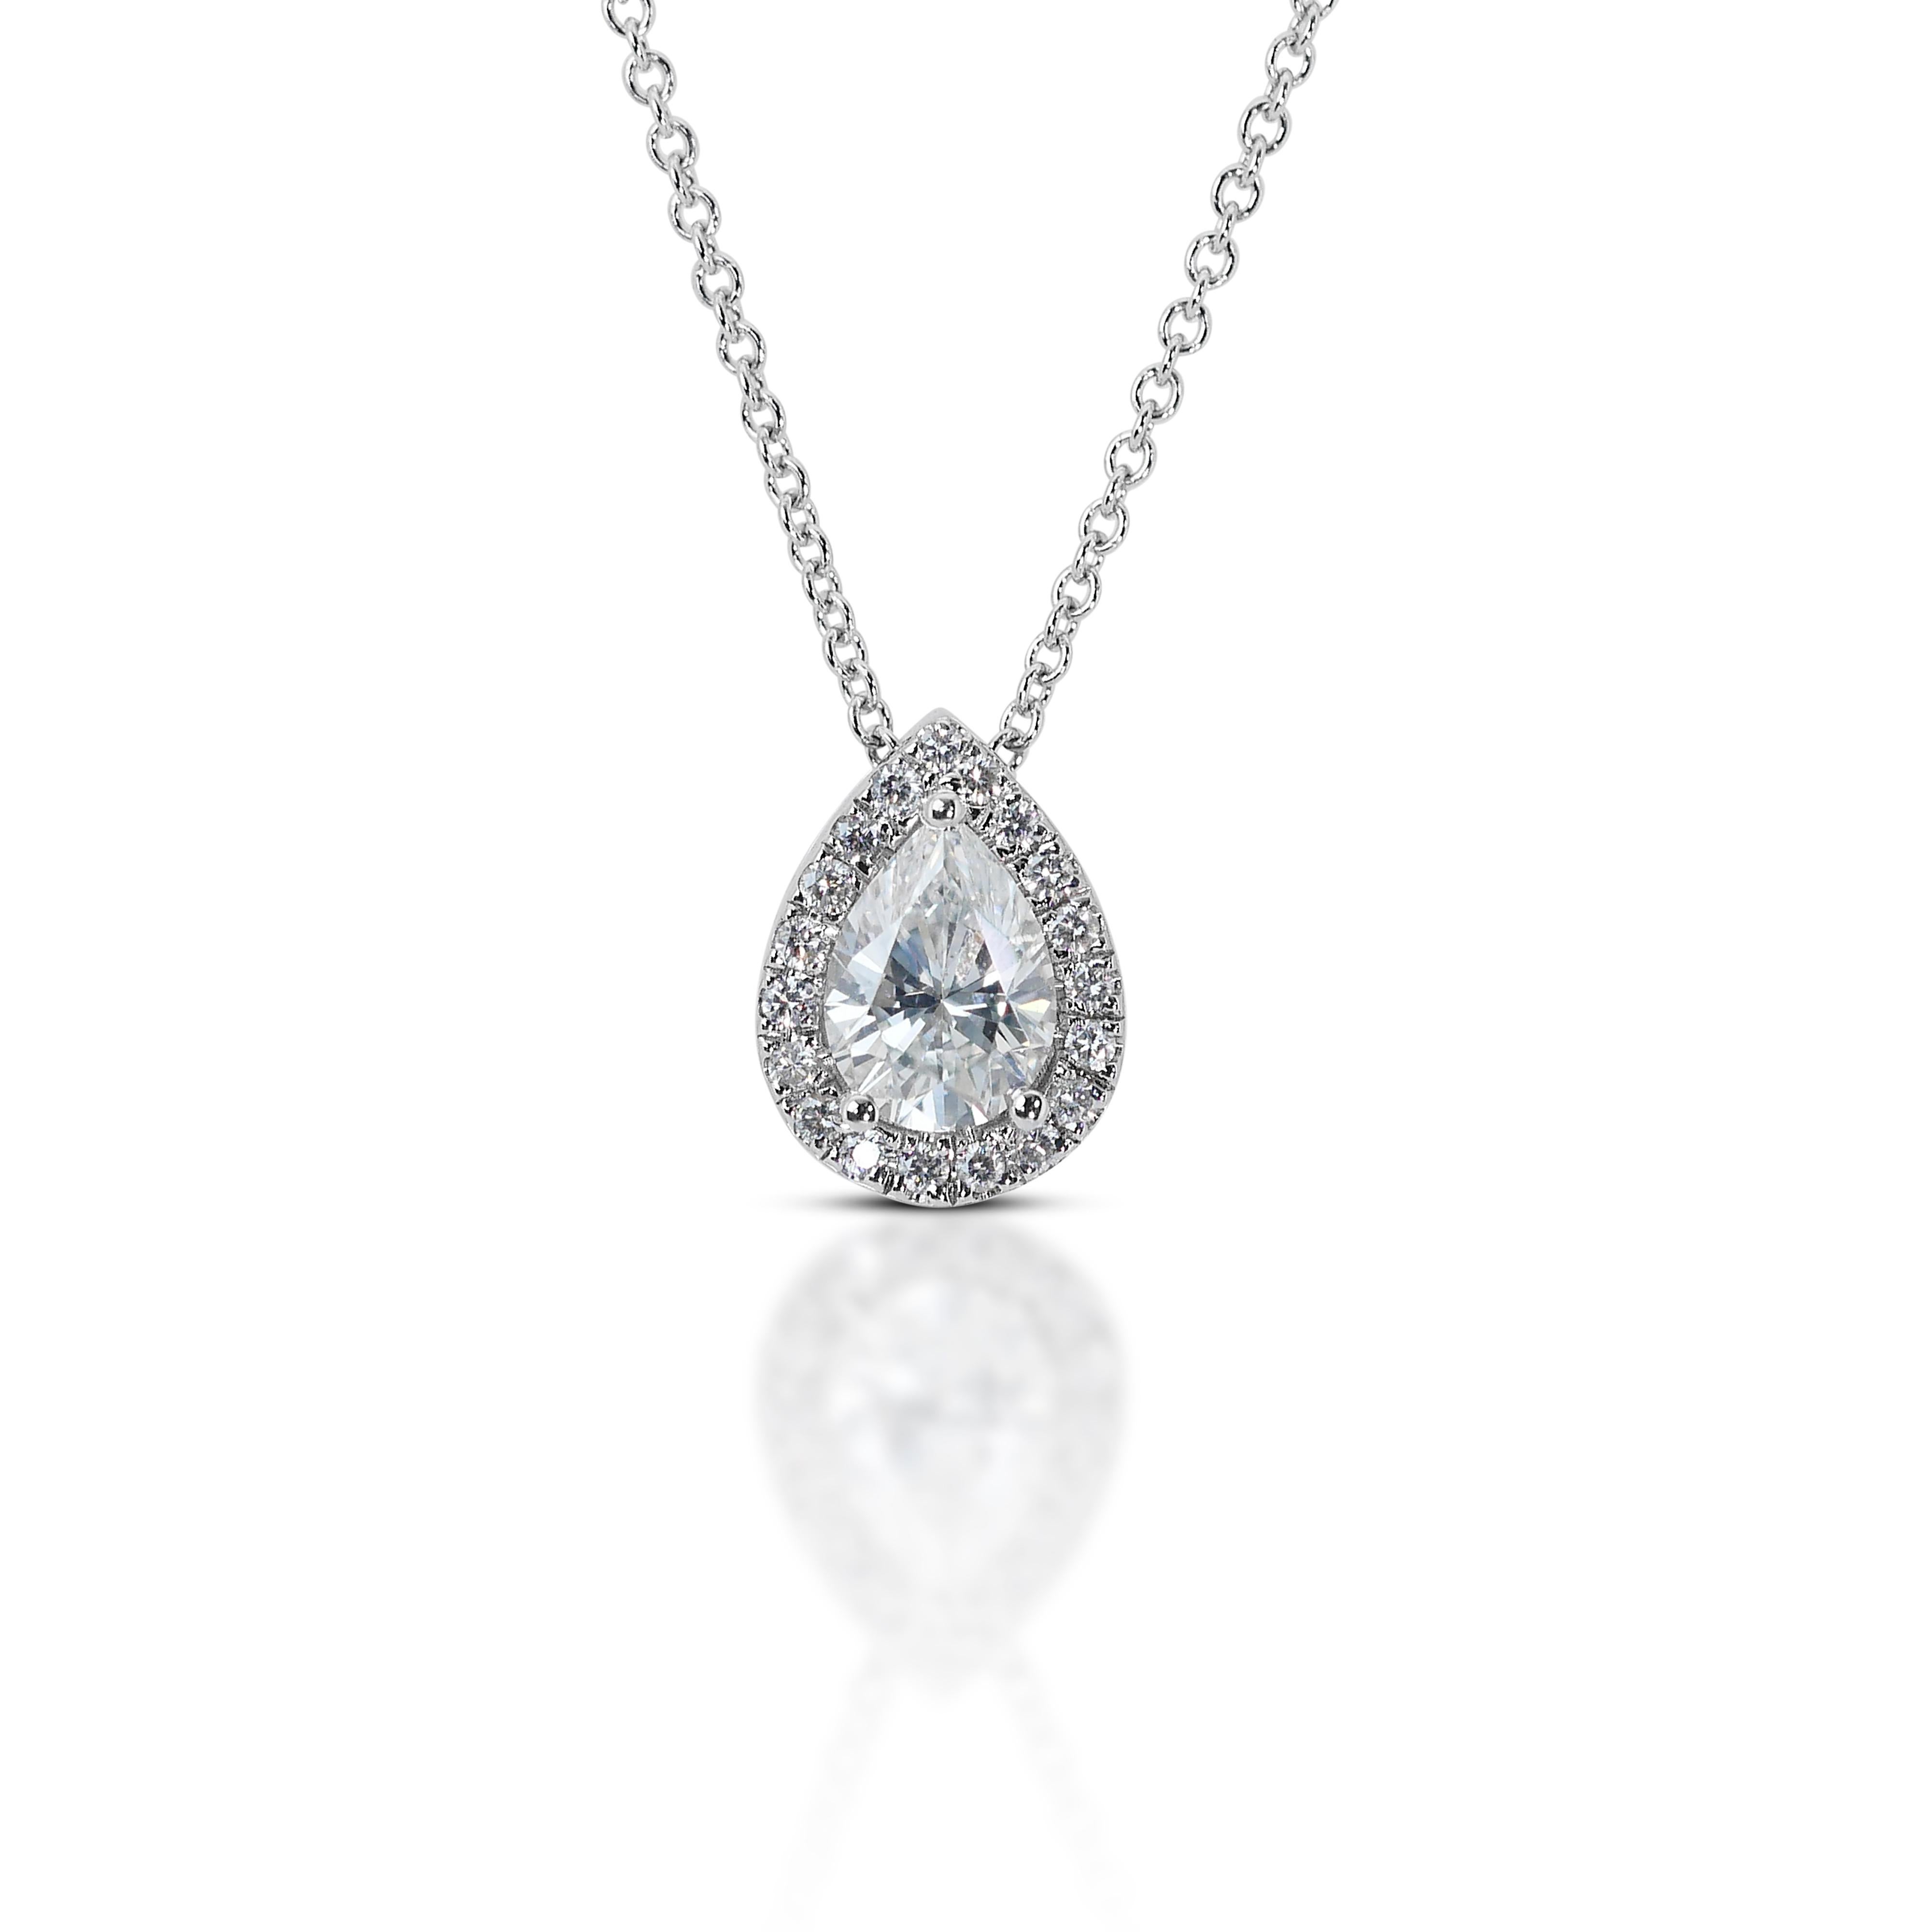 18kt White Gold Ideal Cut 1.00 ct Diamond Pendant - GIA Certified
Crafted with meticulous attention to detail, this pendant features a brilliant-cut diamond as the centerpiece, surrounded by a halo of smaller diamonds, creating a mesmerizing display